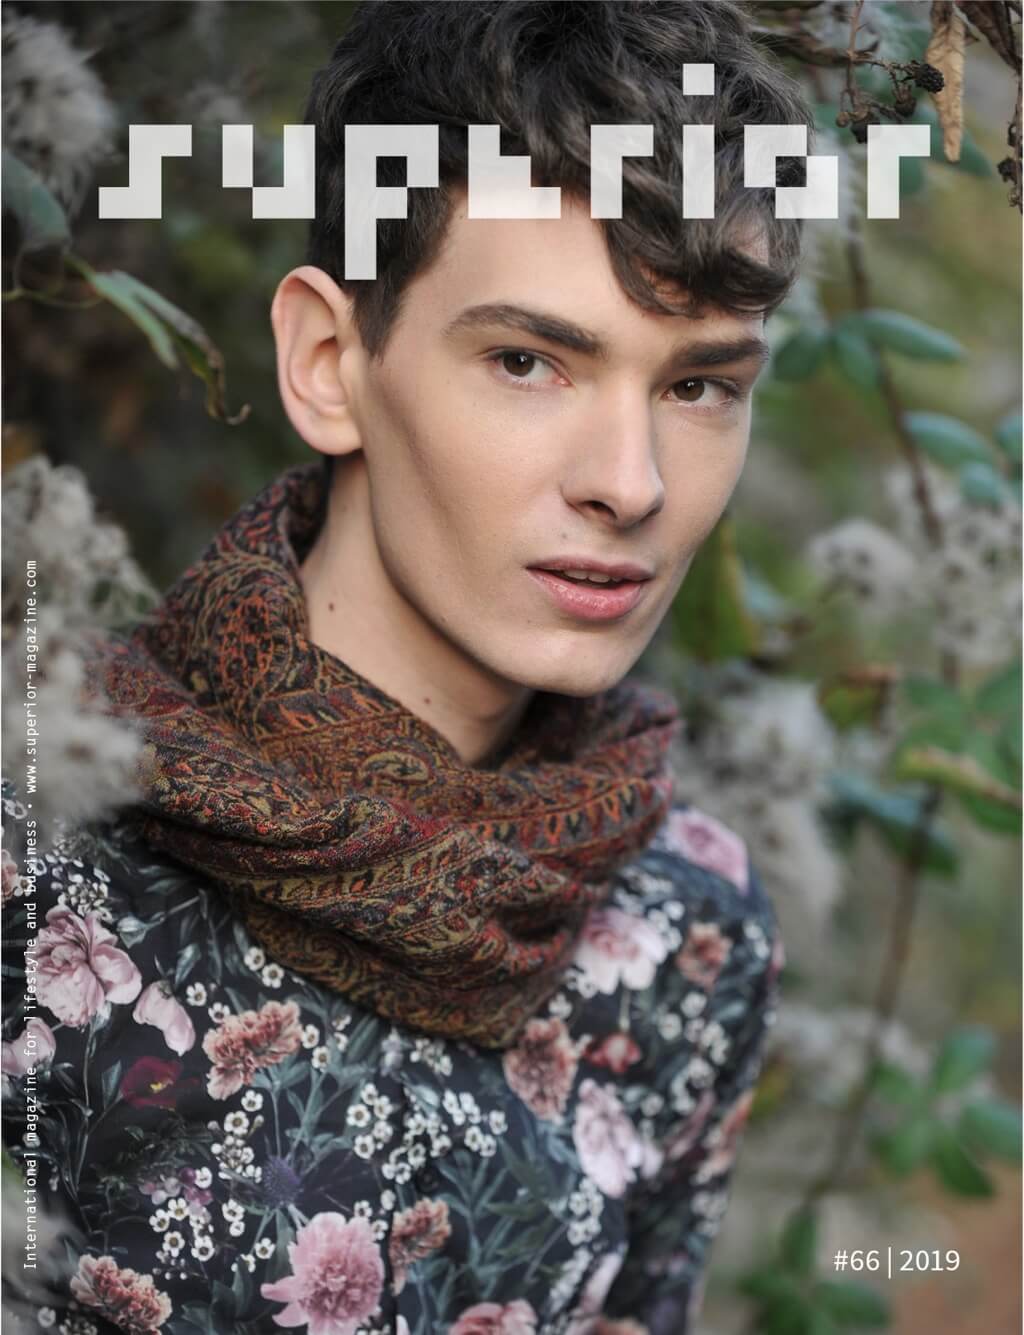 Superior Magazine # 66 | Cover by Arno Ende